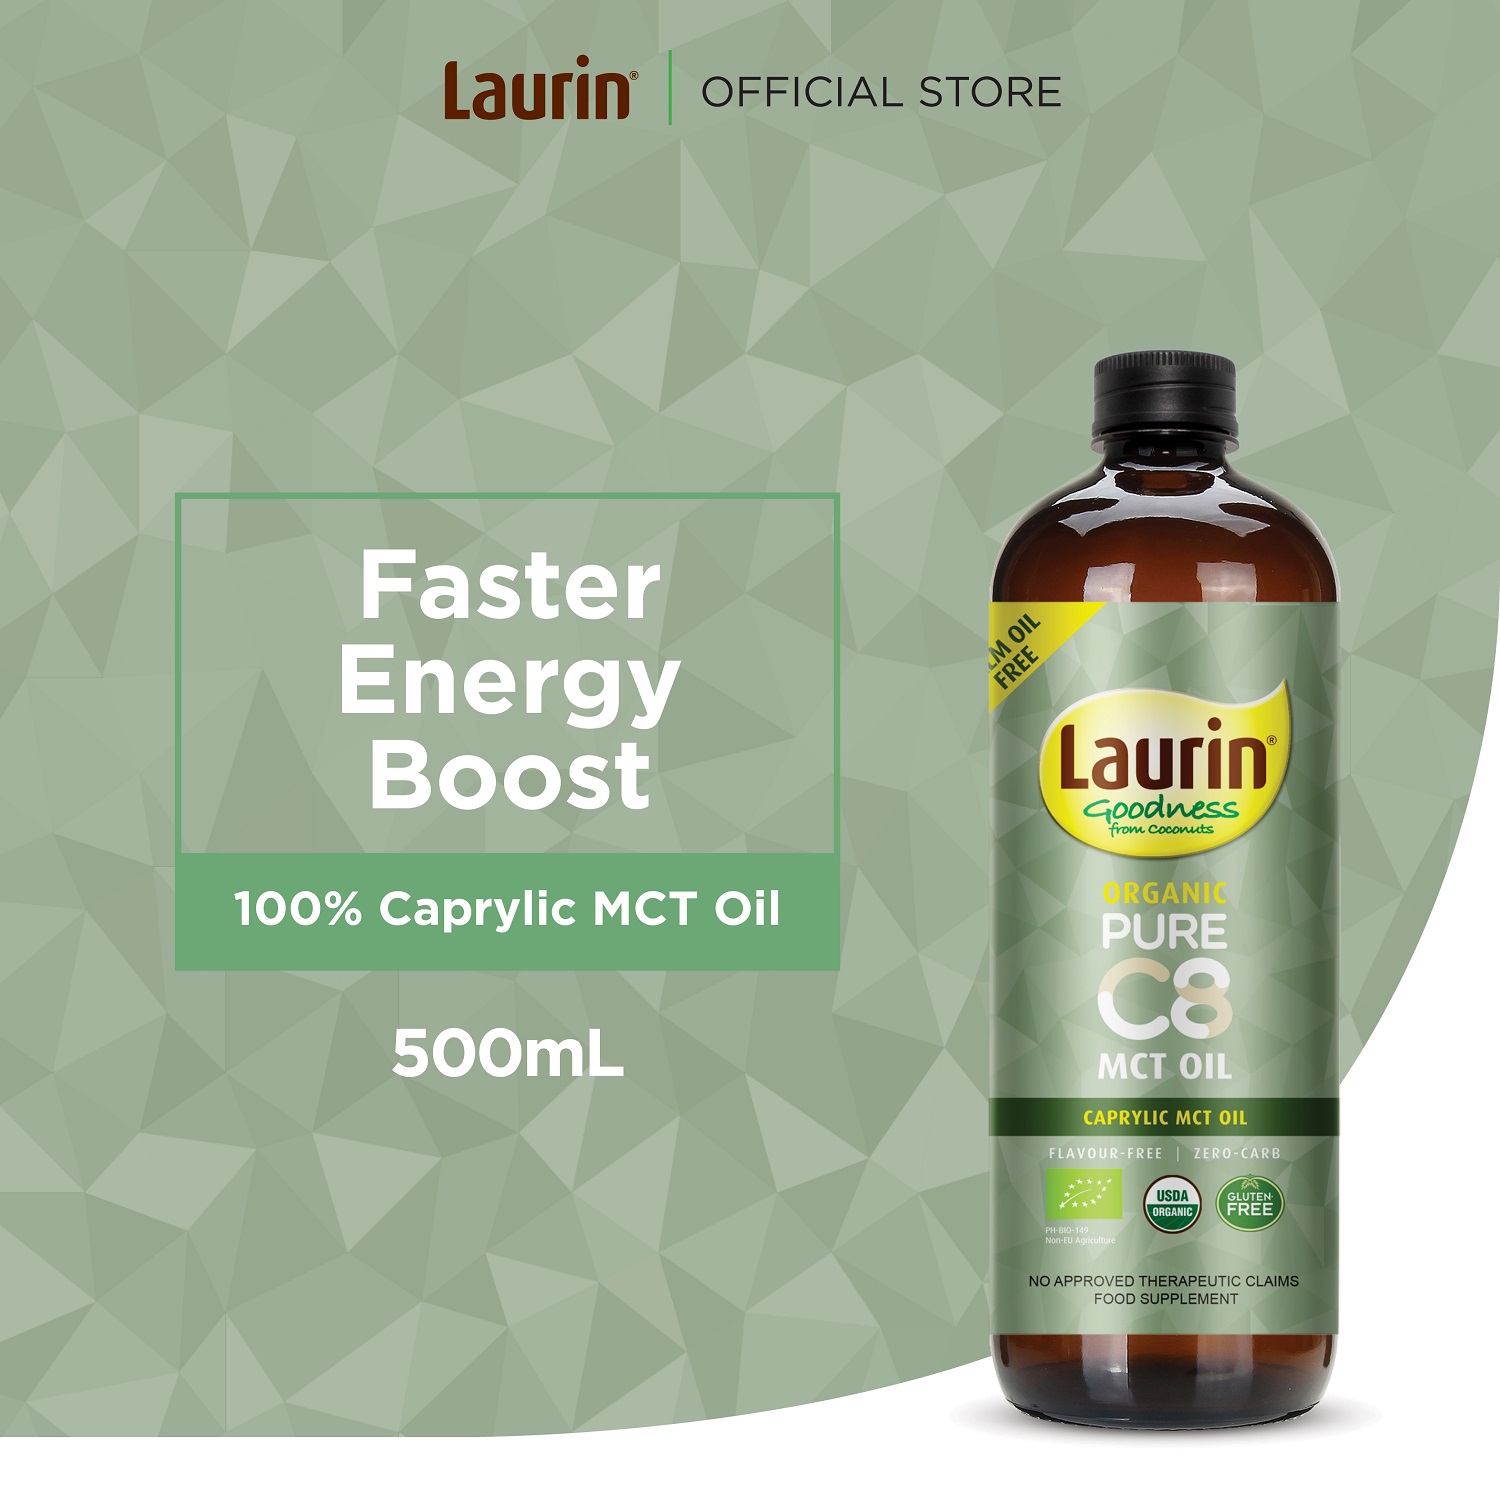 Laurin Pure C8 MCT Oil from Coconut Oil 500mL Lazada PH